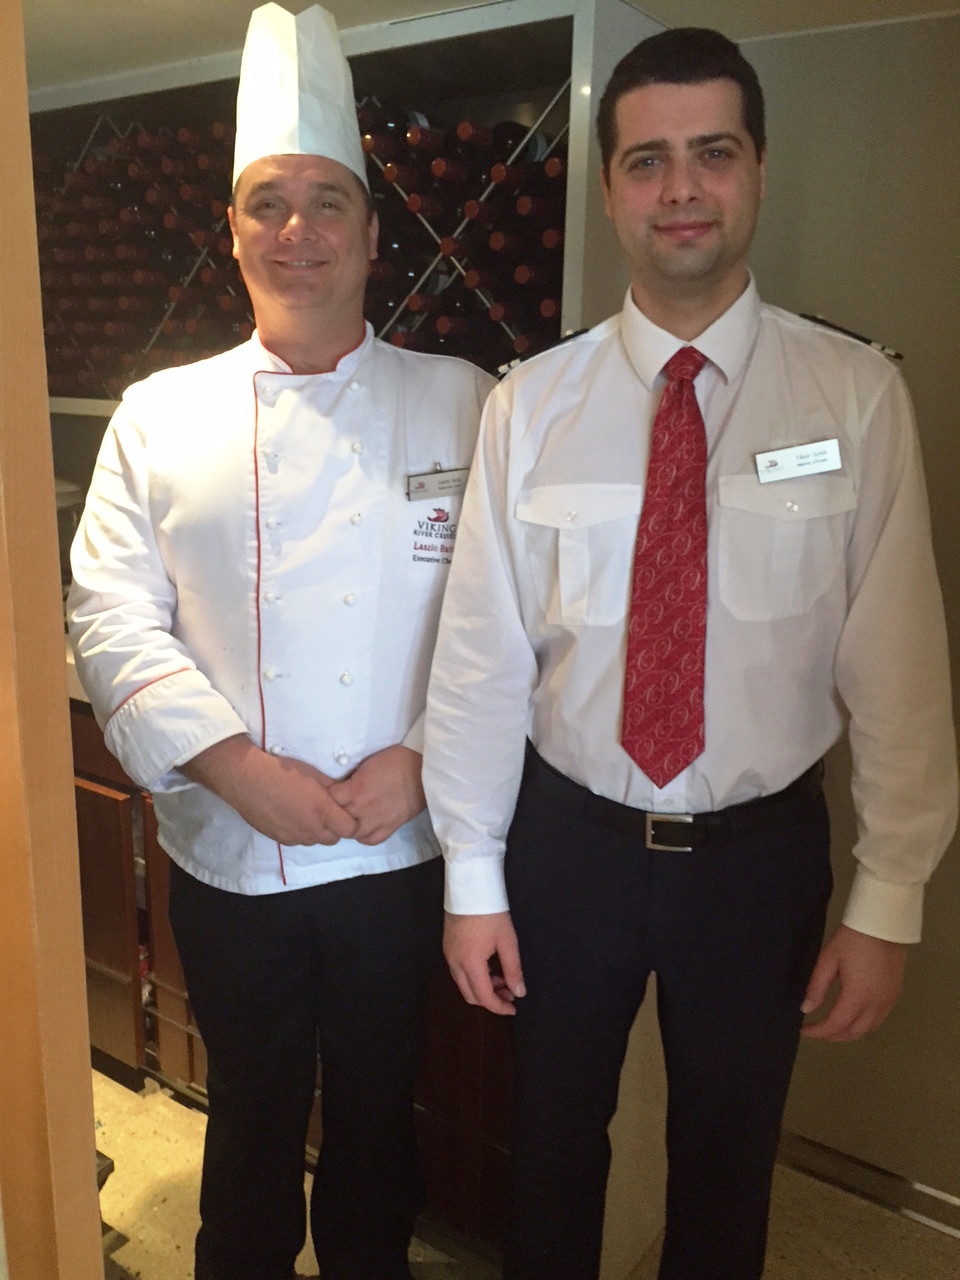 Viking Tor Executive Chef Lazlo and Dining Room Manager Tibor